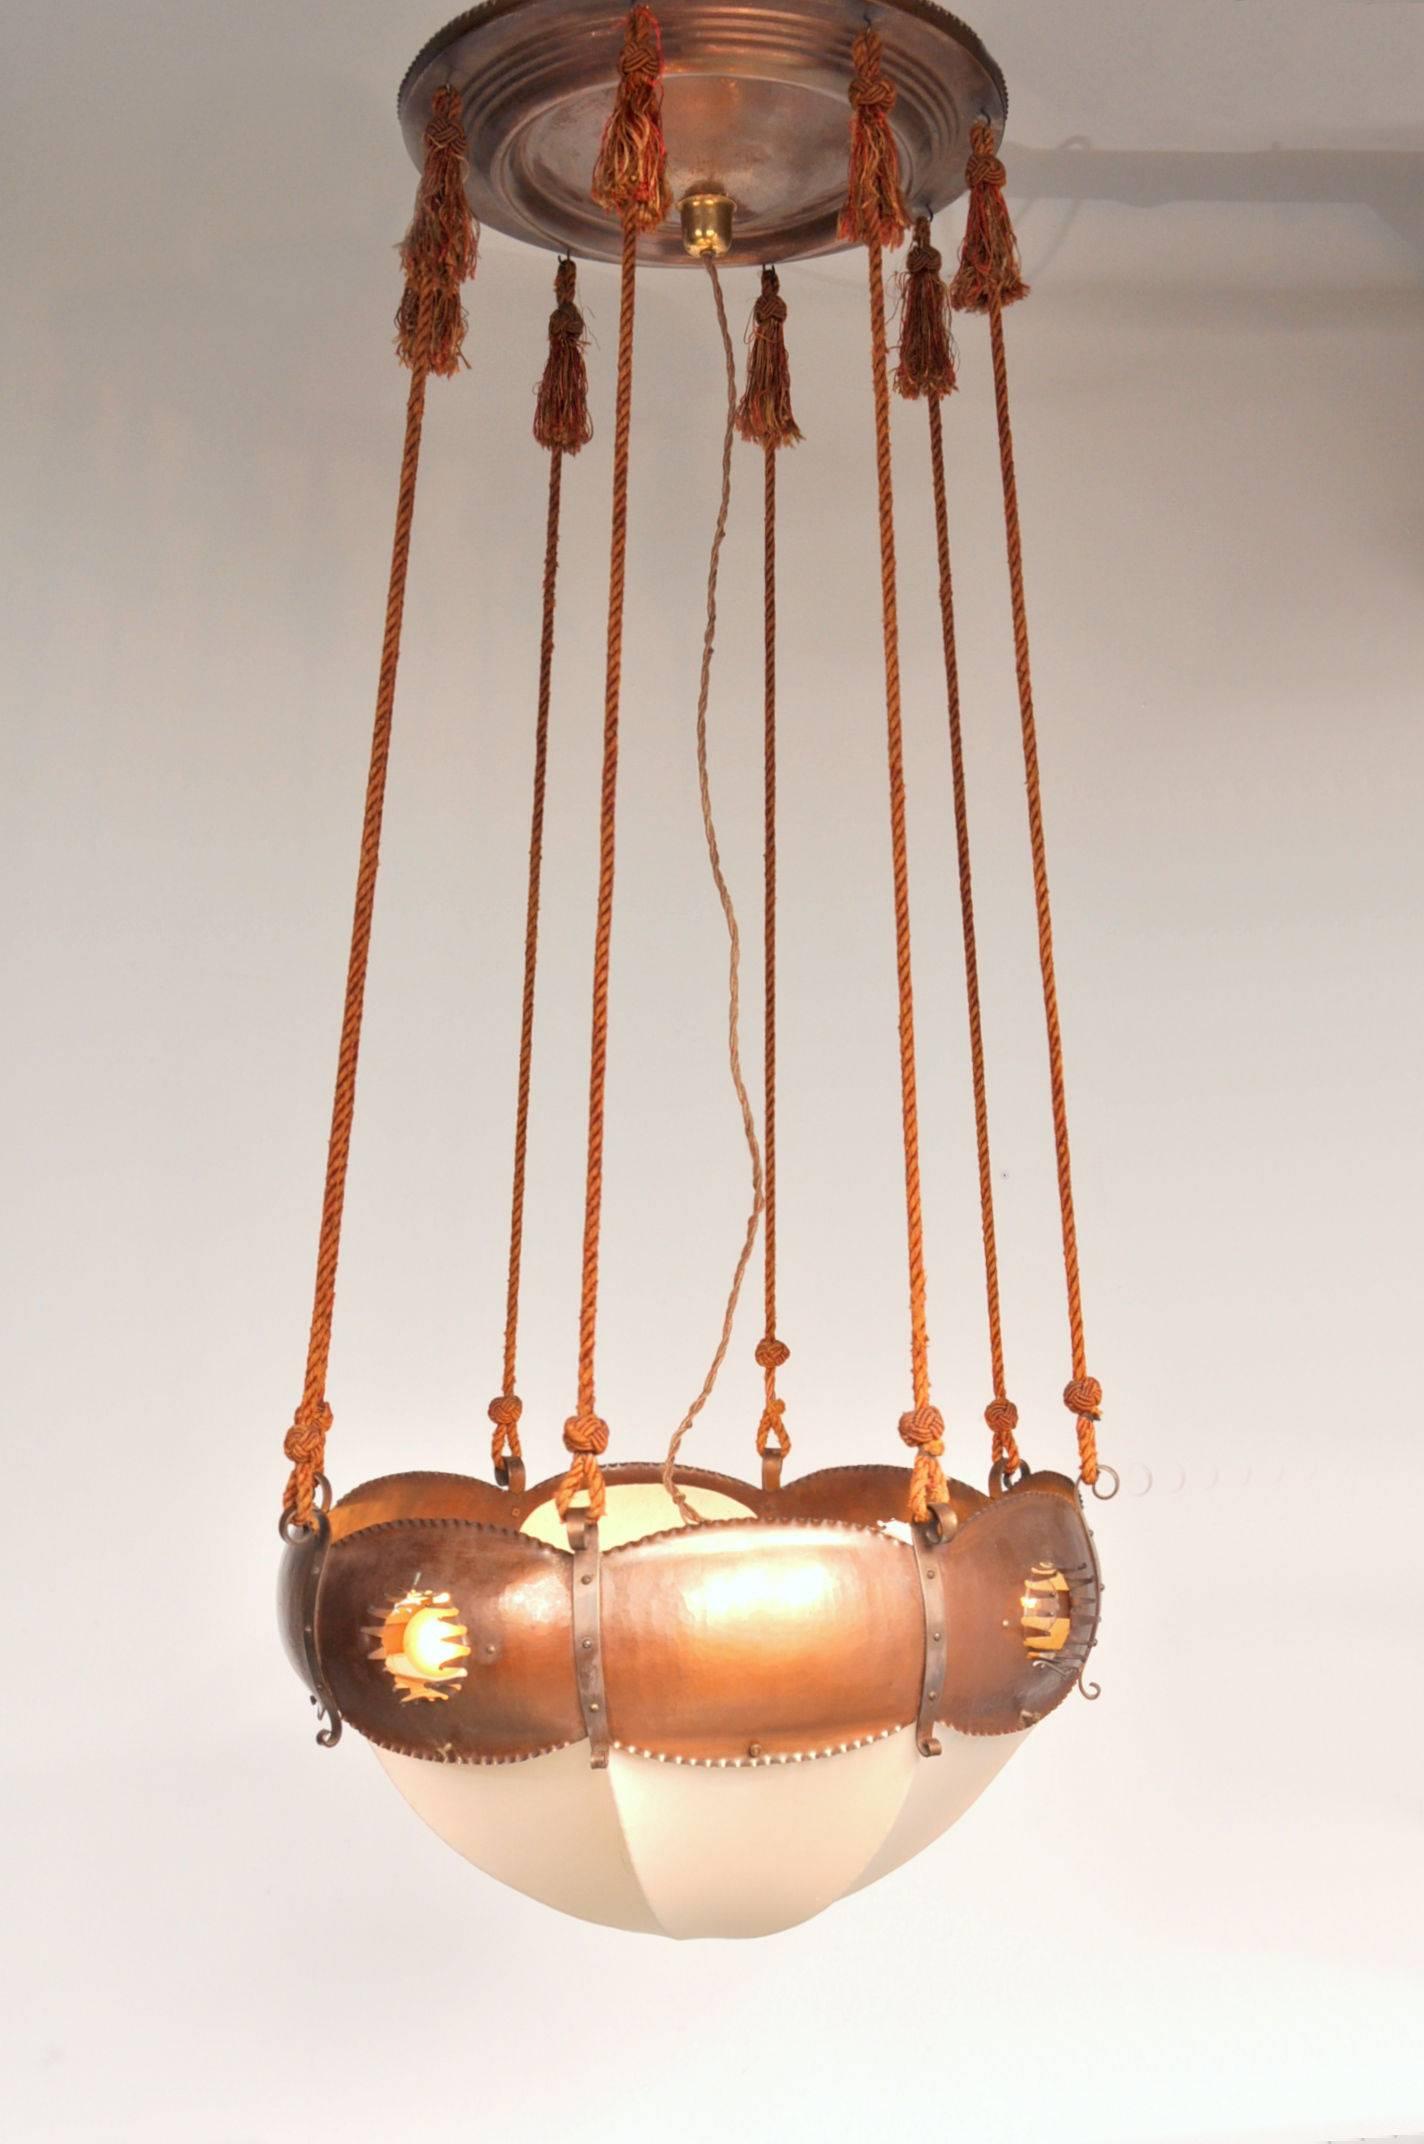 Eye-catching ceiling lamp designed and manufactured by Winkelman & Van der Bijl, manufactured in the Netherlands, circa 1925.

This stunning piece is made of high quality openworked and chased copper with rope supports and a fabric shade. It has a